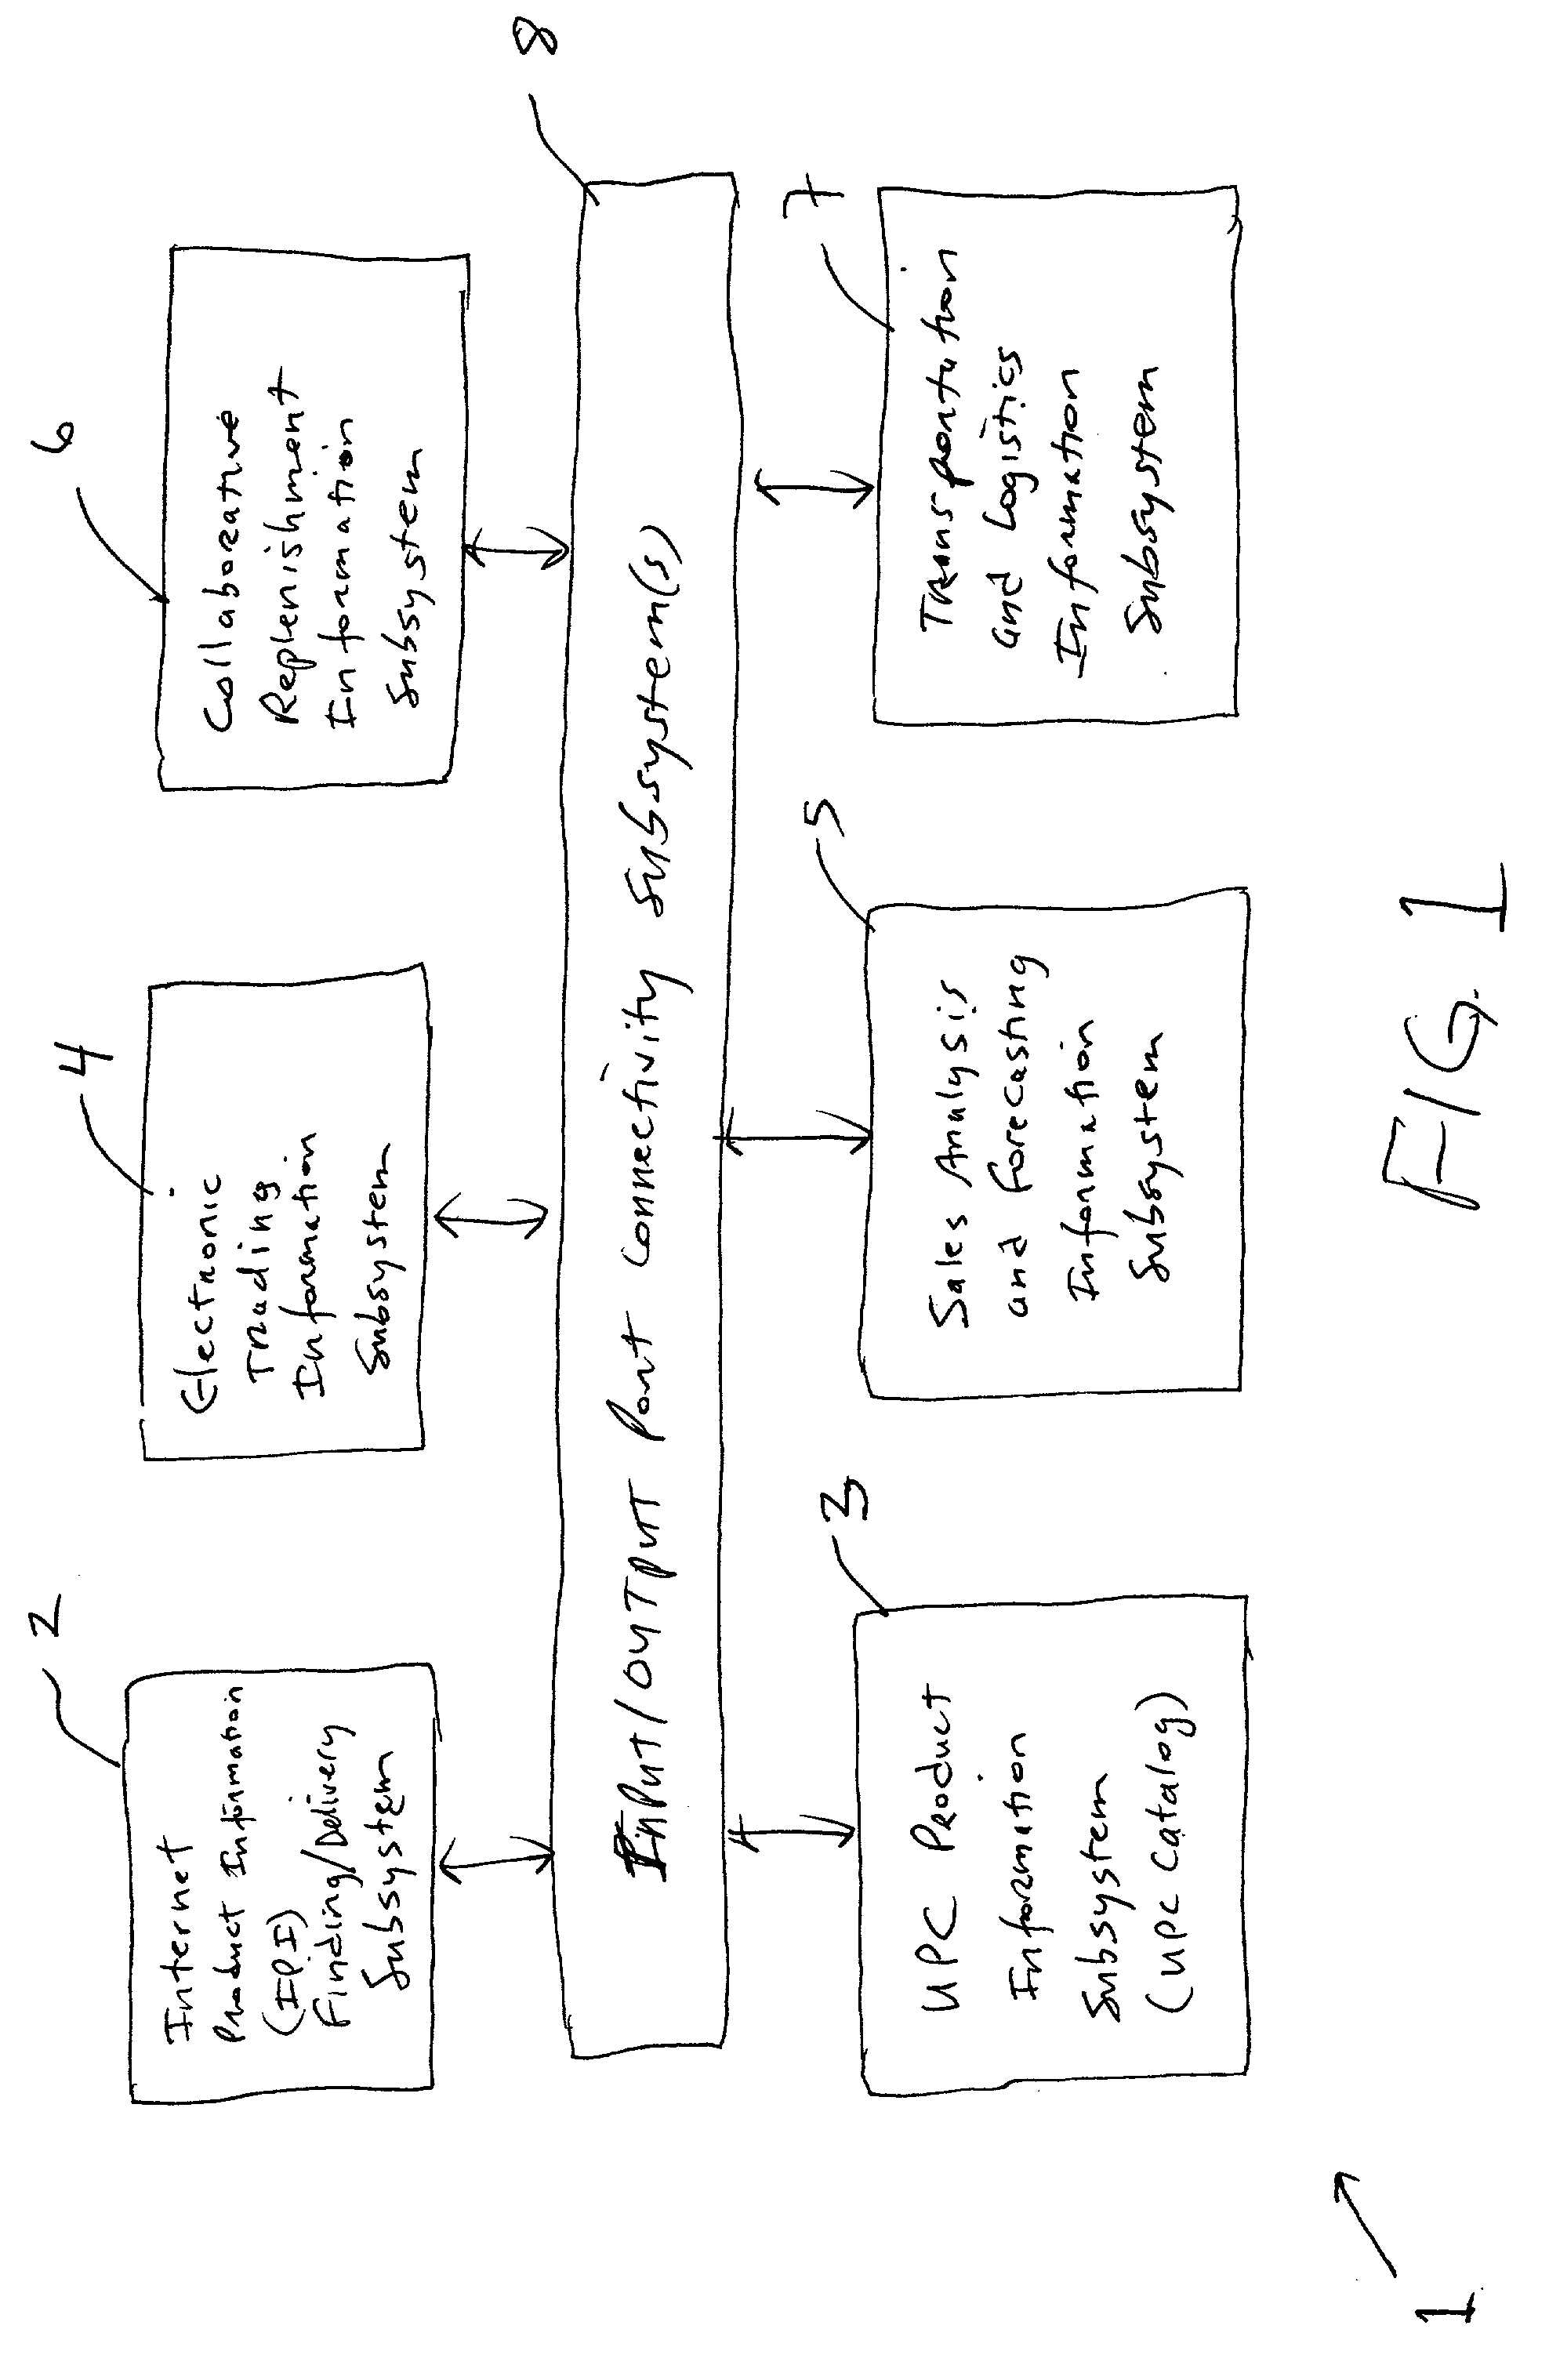 System and method for finding and serving consumer product related information to consumers using internet-based information servers and clients